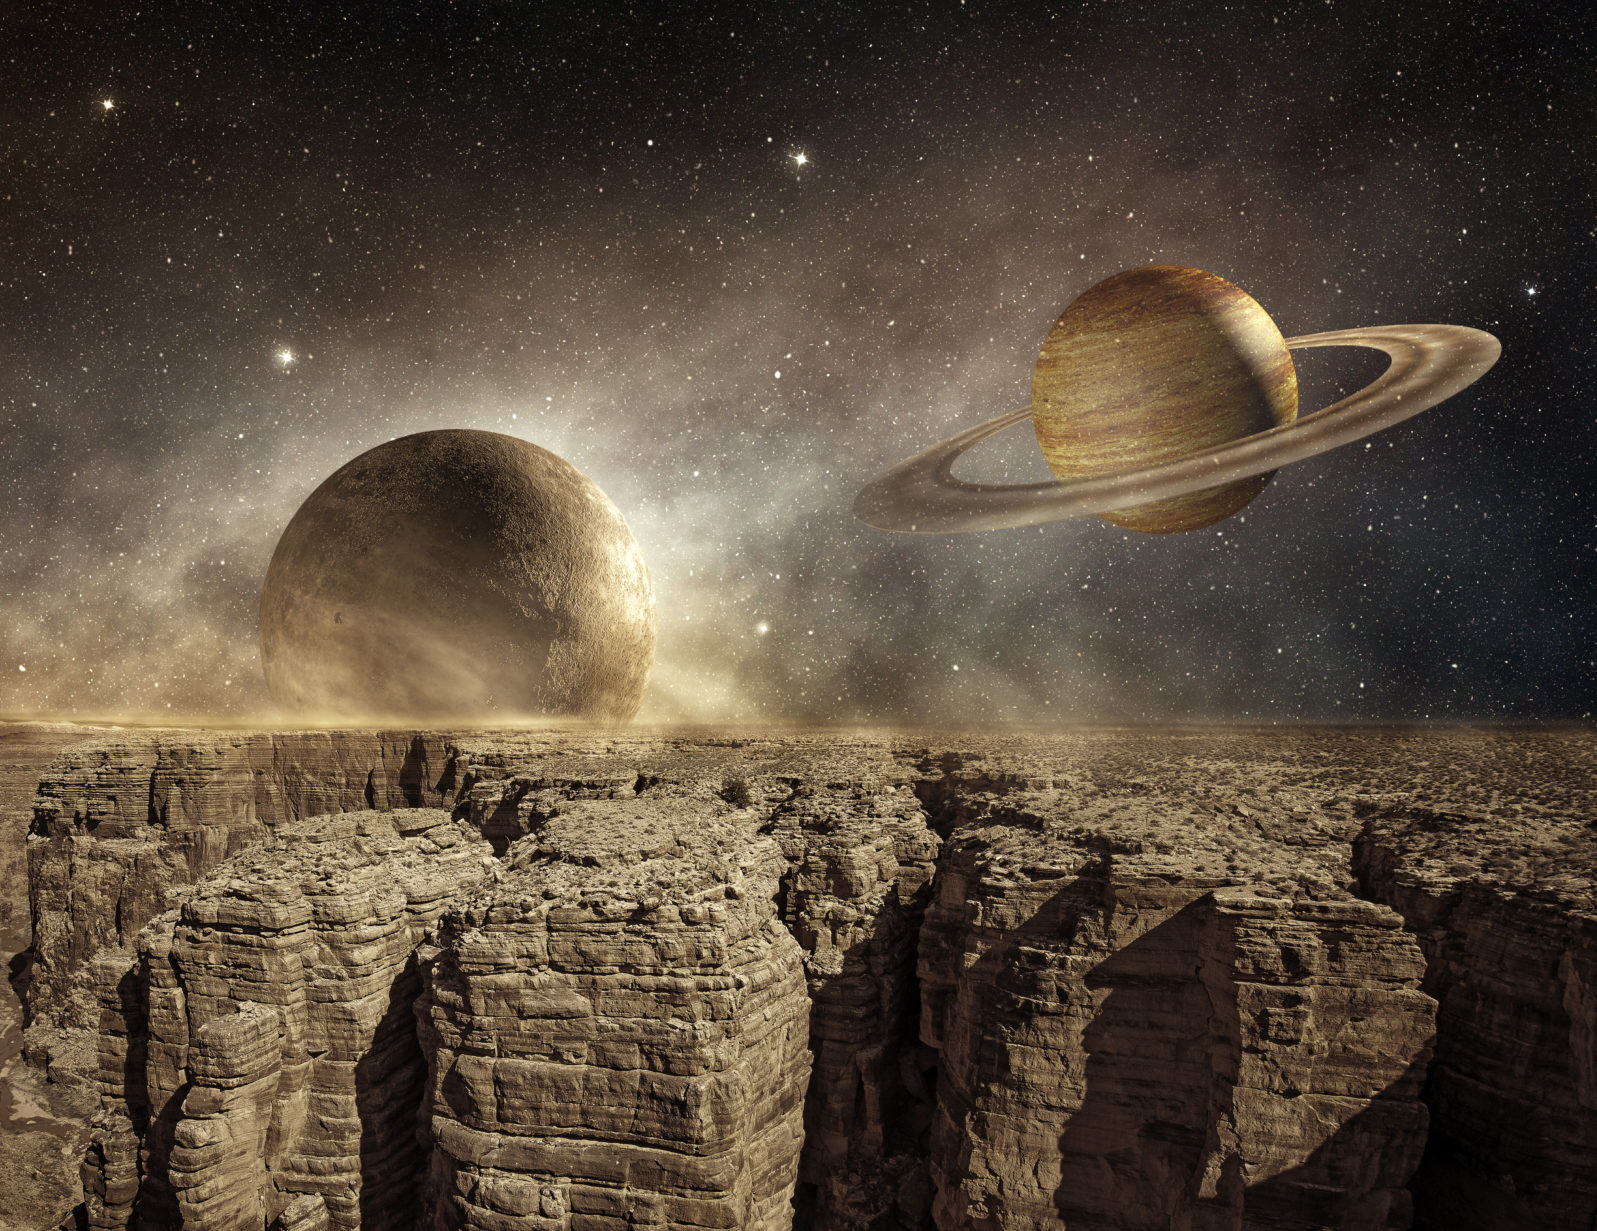 saturn and moon in the sky of a barren landscape